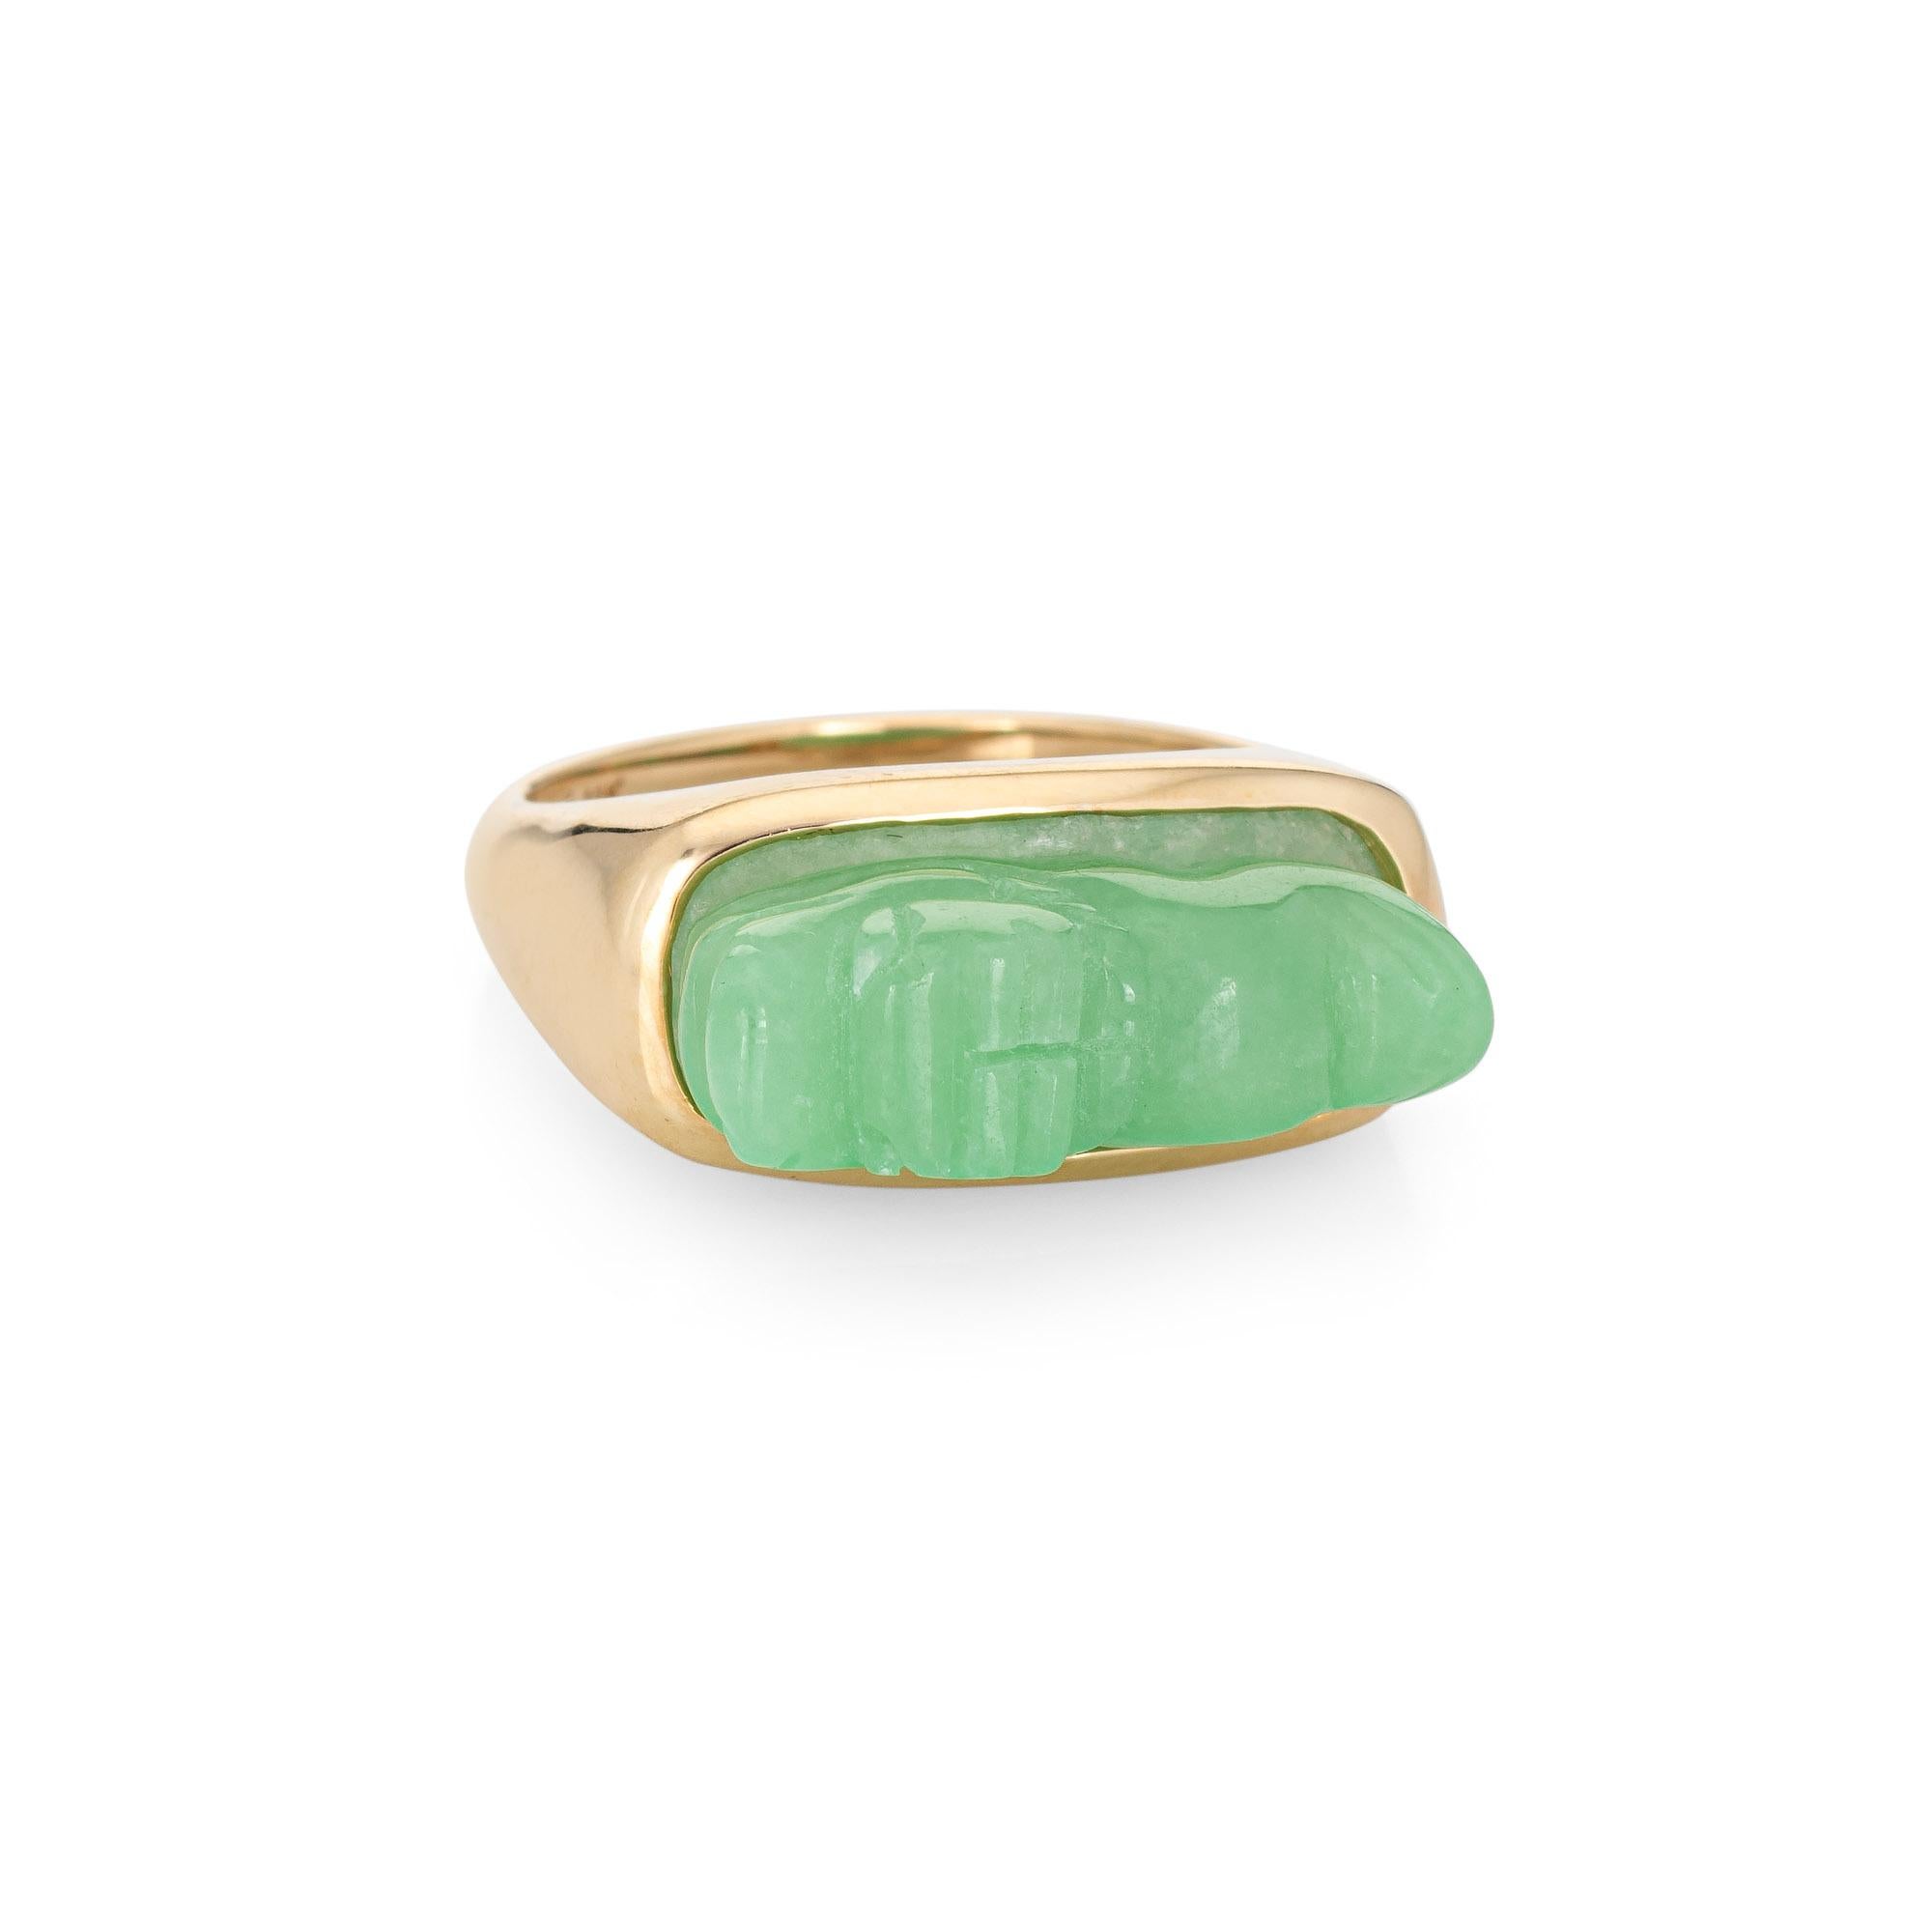 Stylish vintage carved jade dragon ring crafted in 14 karat yellow gold. 

Carved jade measures 24mm x 7mm. The jade is in very good condition and free of cracks or chips. 

Jade is carved in the form of a dragon, a symbol of strength and fire. The